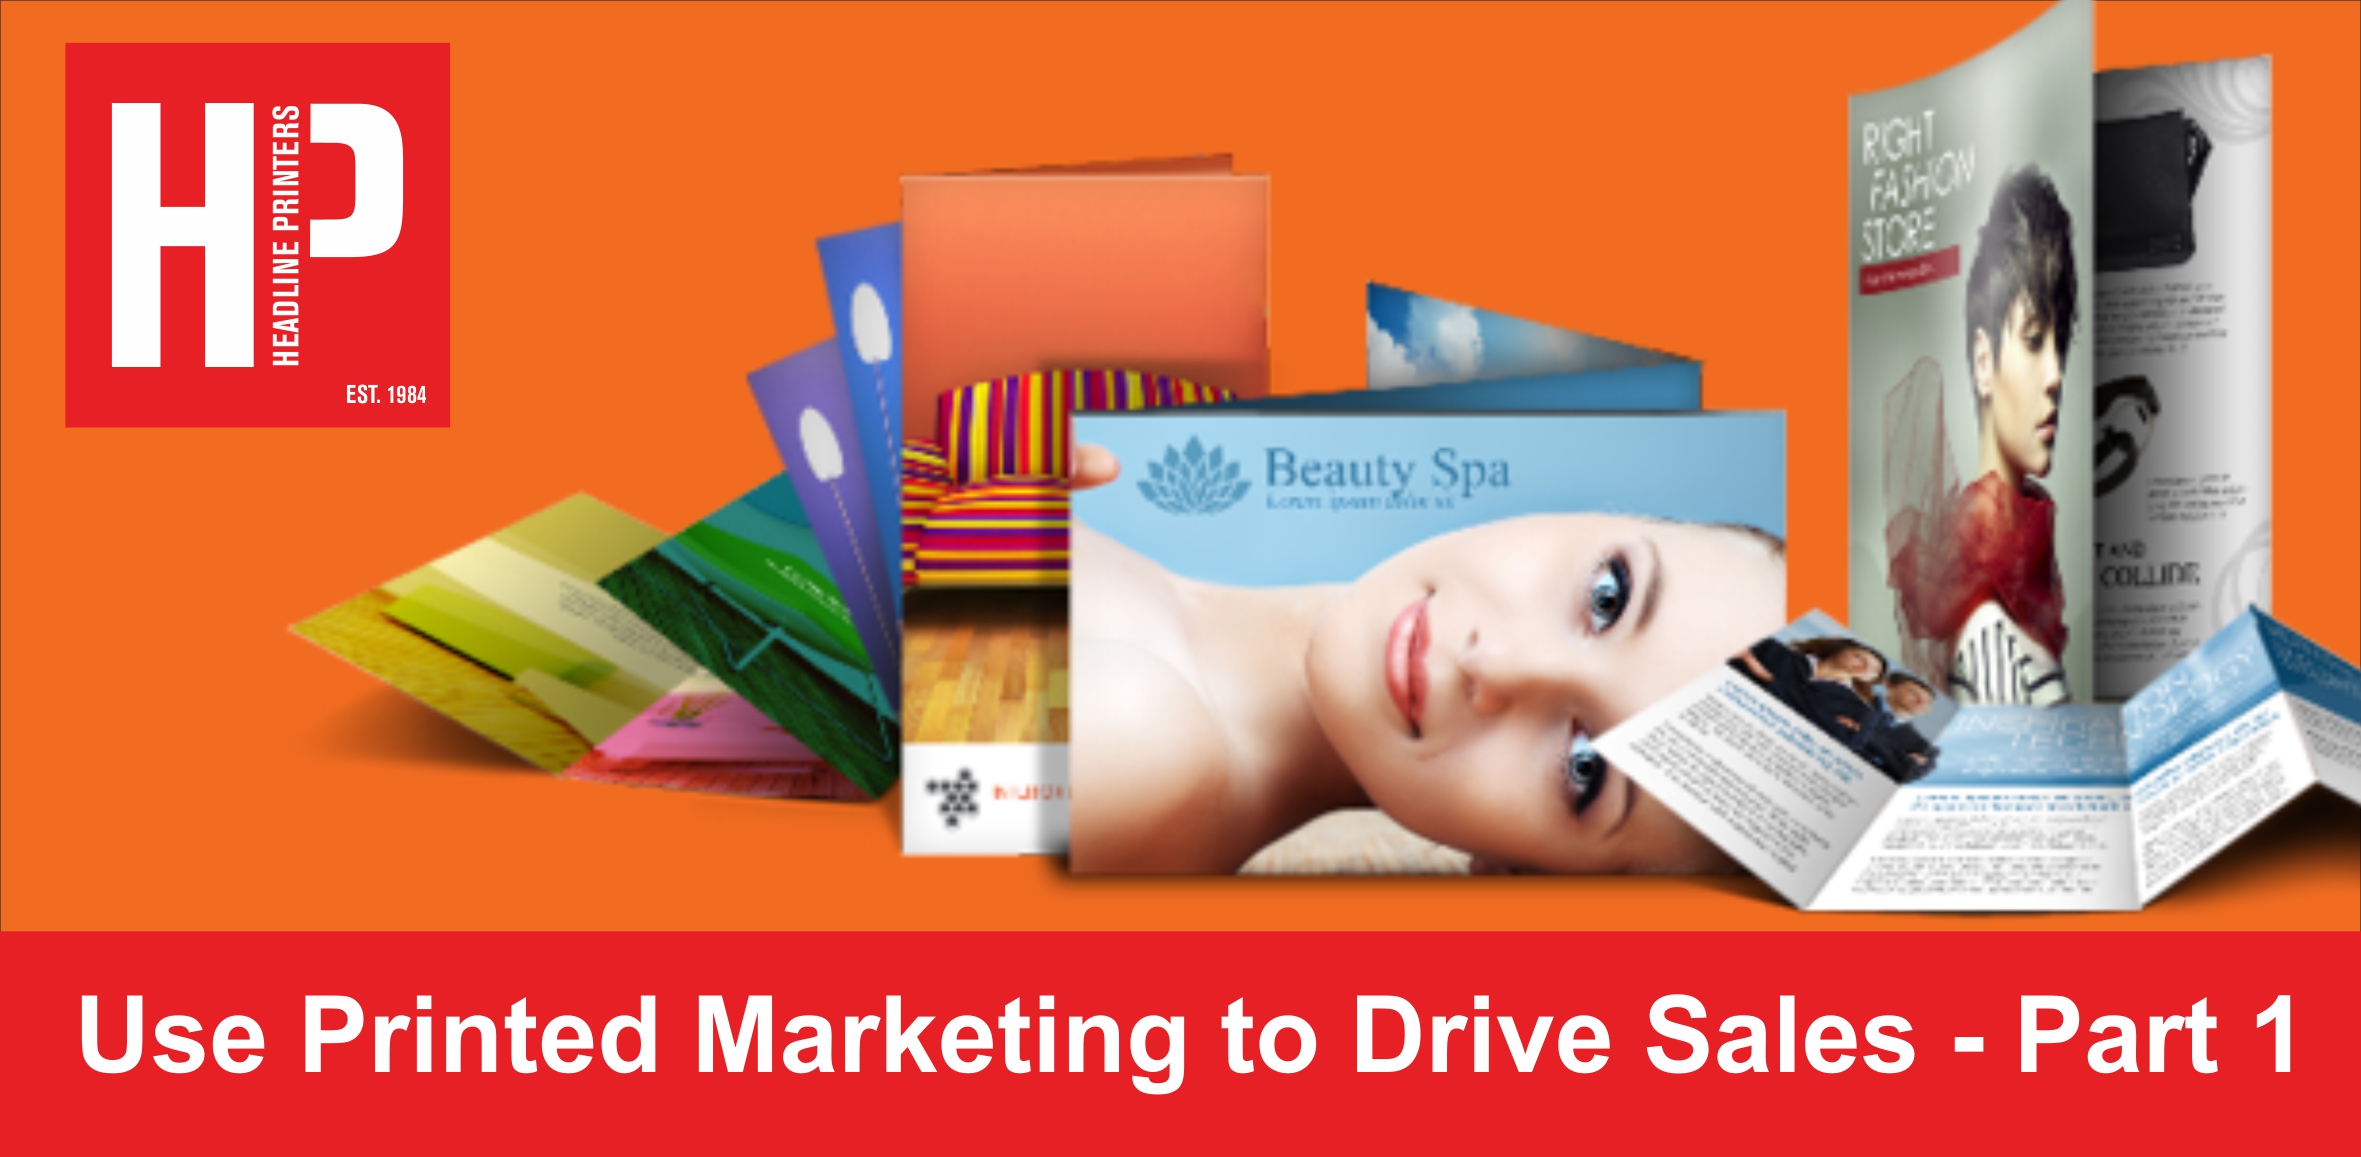 Use Printed Marketing to Drive Sales - Part 1